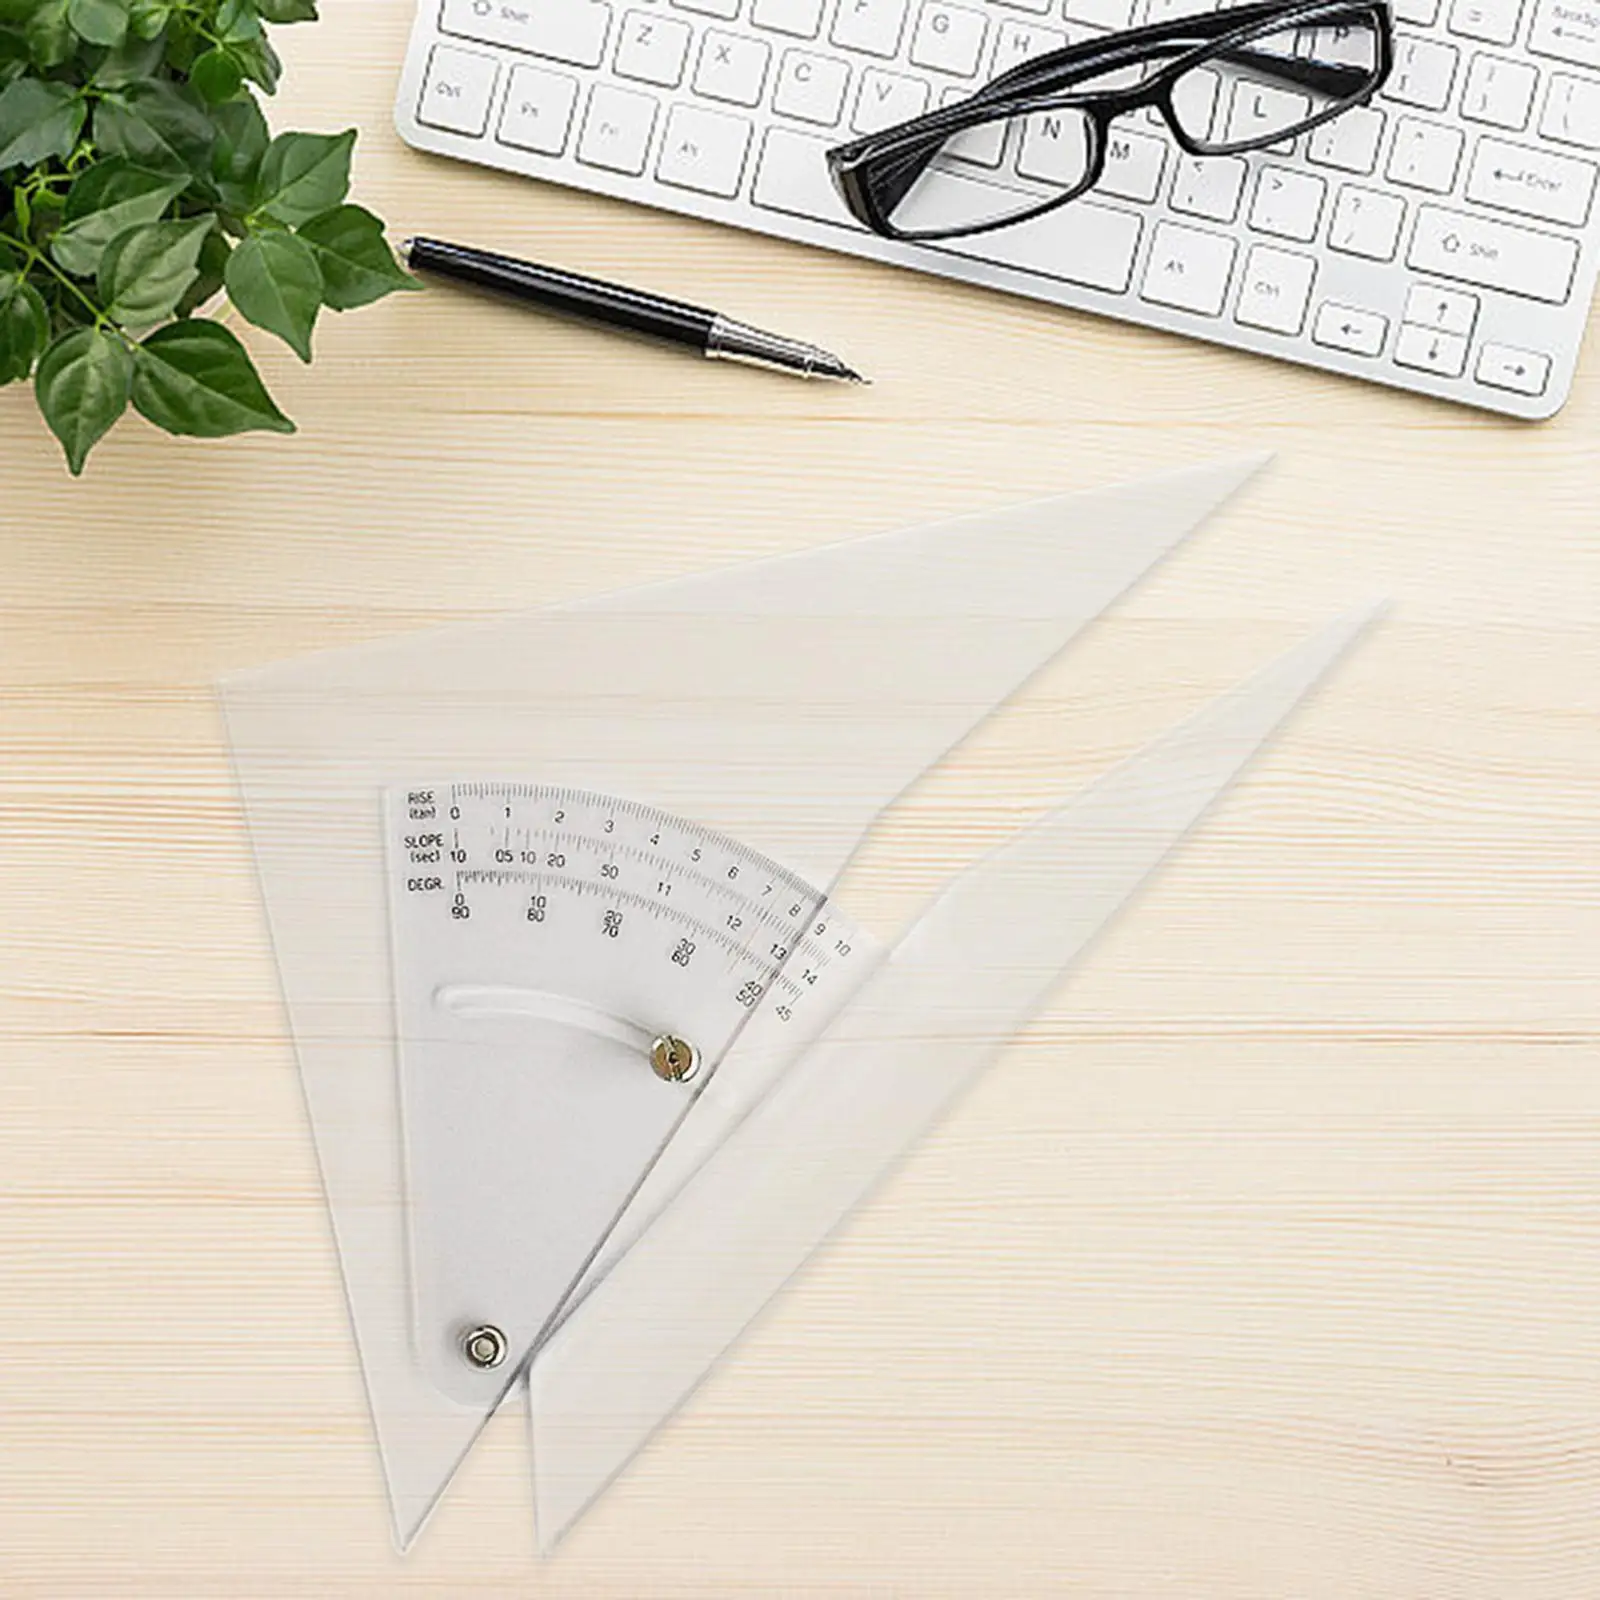 Adjustable Drafting Triangle Ruler Tool Sketch Durable Art Supplies Adjustable Ruler for Professional Drawing Sketching Supplies